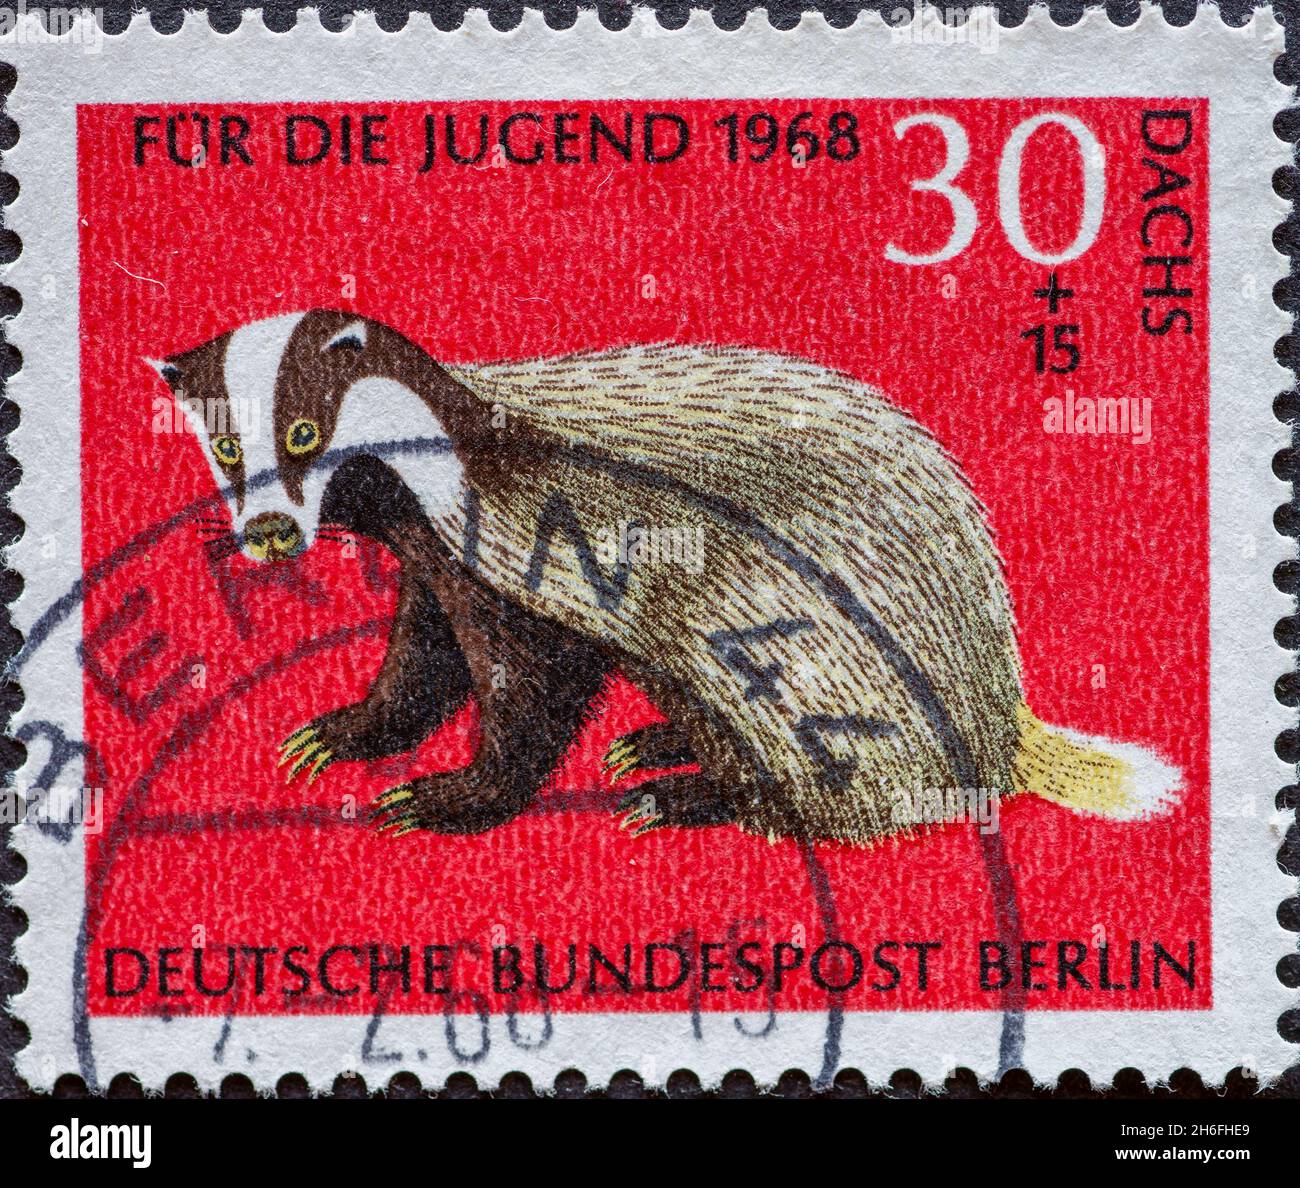 GERMANY, Berlin - CIRCA 1968: a postage stamp from Germany, Berlin showing rare wild animals. badger. charity postal stamp for the youth Stock Photo